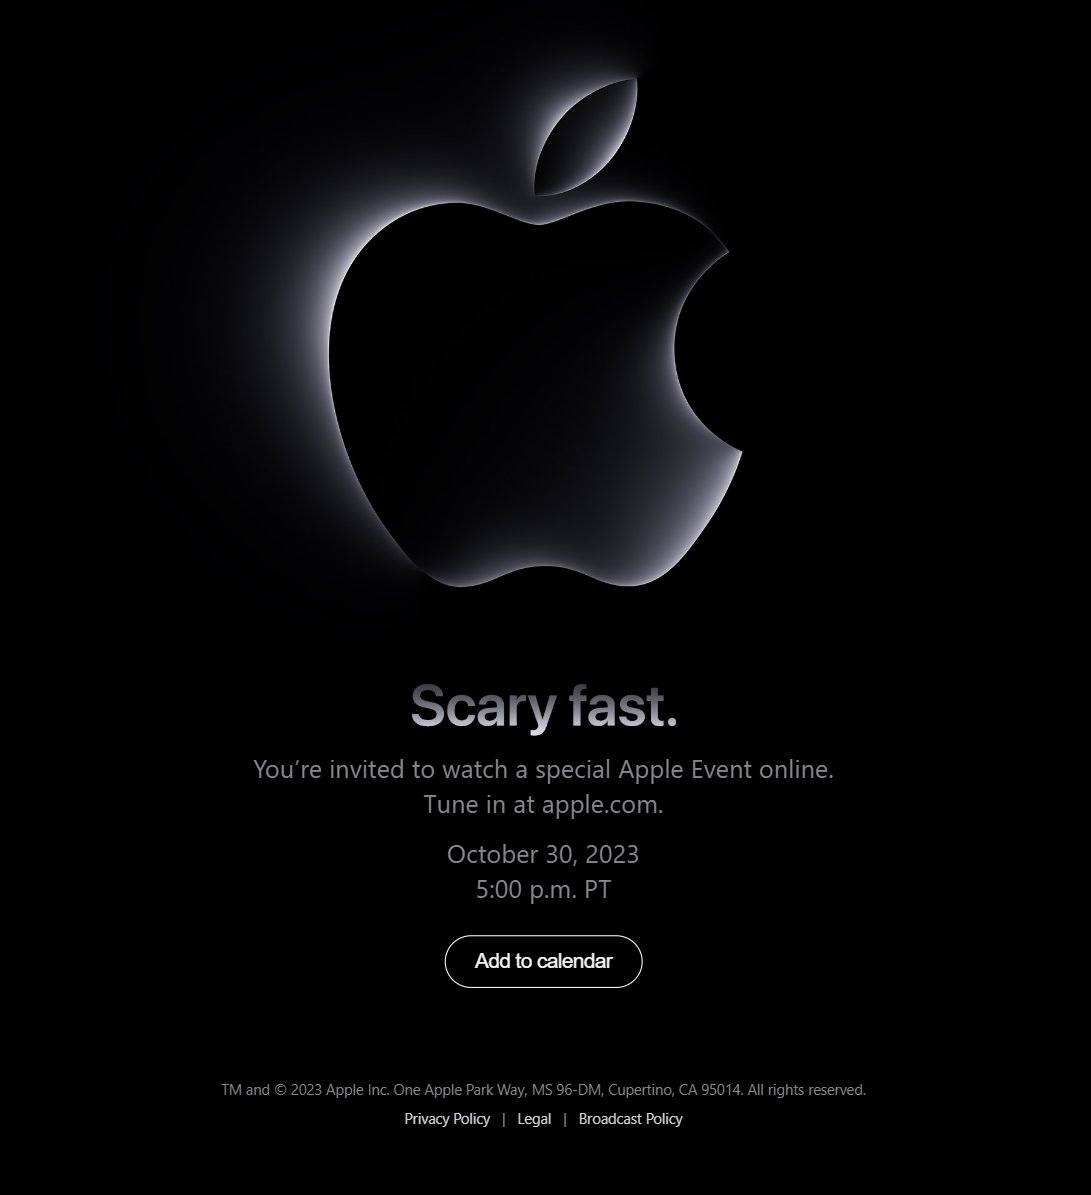 The apple event #Scaryfast  is happening today. New macs and ipads could come. What are your expectations? New M3 chipsets could launch today ! Way too excited for the new mac capabilities.. #AppleEvent #Apple Invitations already came 
India timing is 5:30 am 😵‍💫 have to wake up